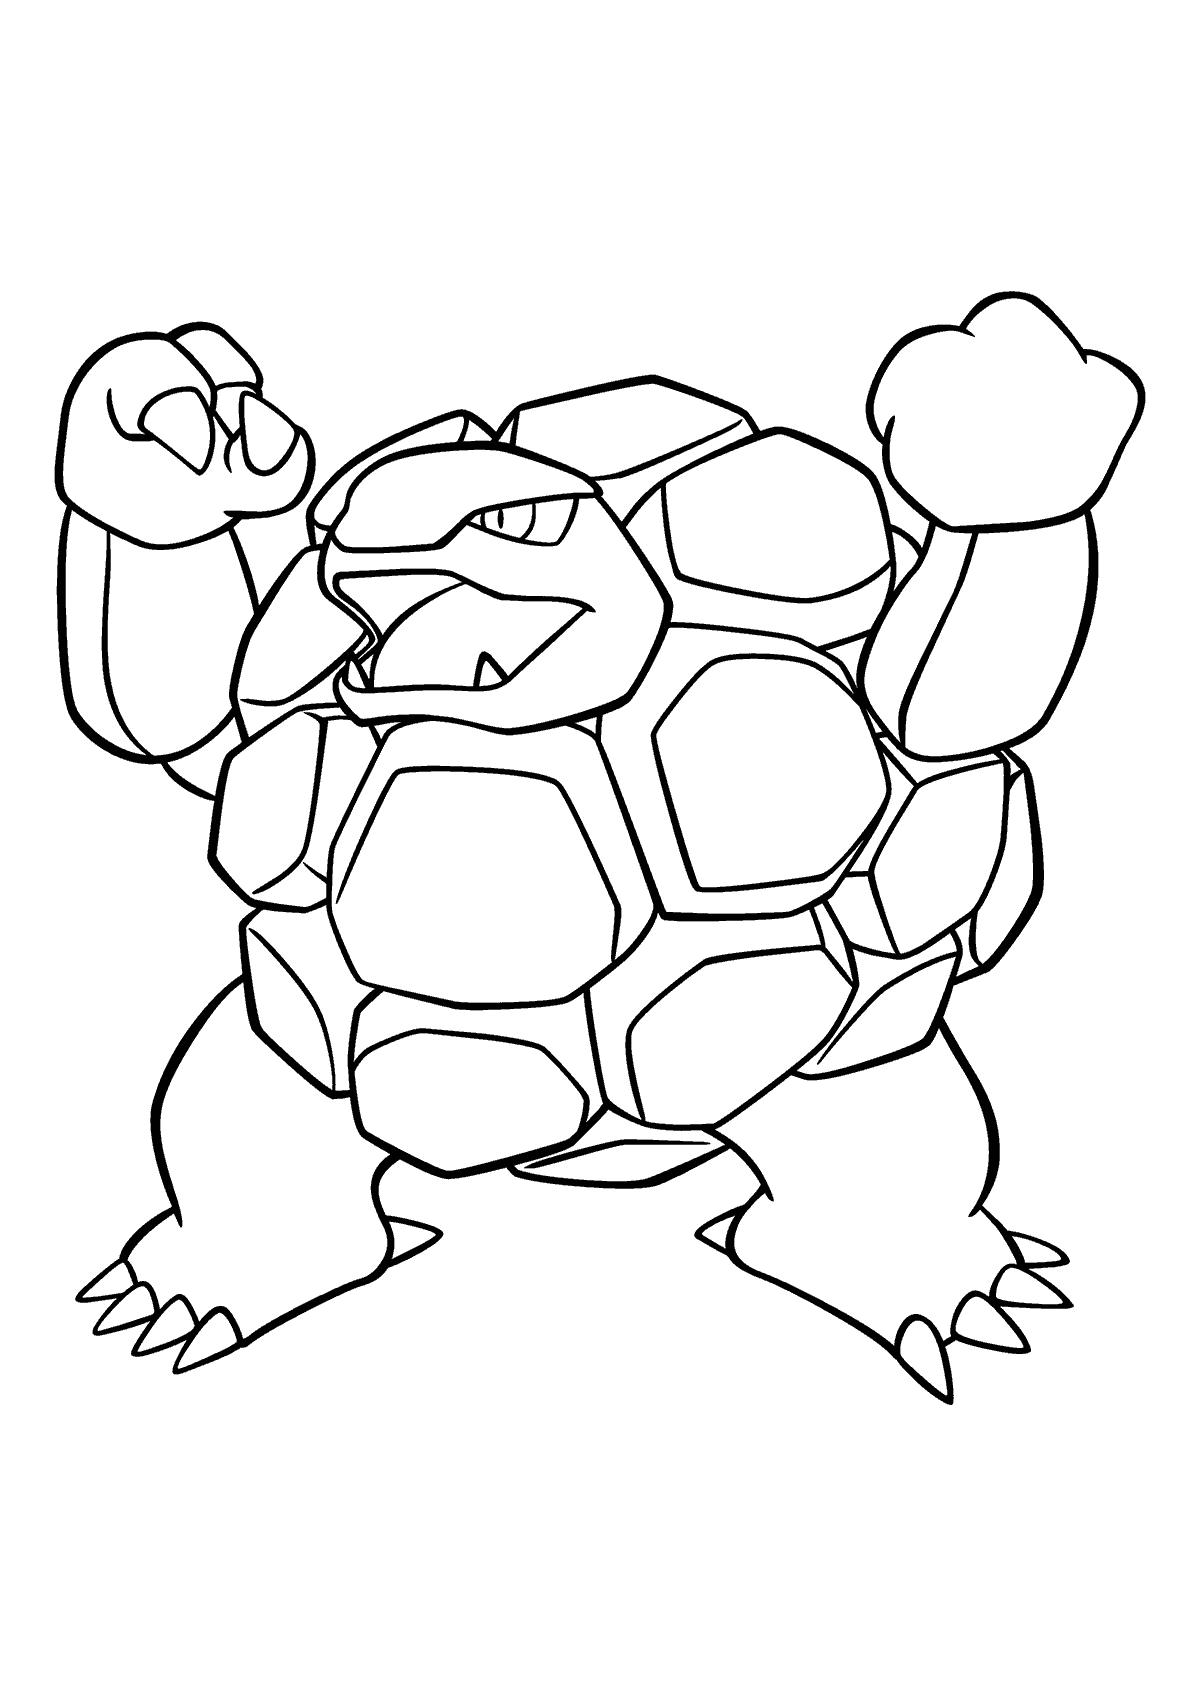 coloring page: Large, bulky Rock-type Pokémon w/orange & gray body, black diamond on chest, black horns, small red eyes, 2 large teeth, grey tongue, and 3 black claws on hands & feet.